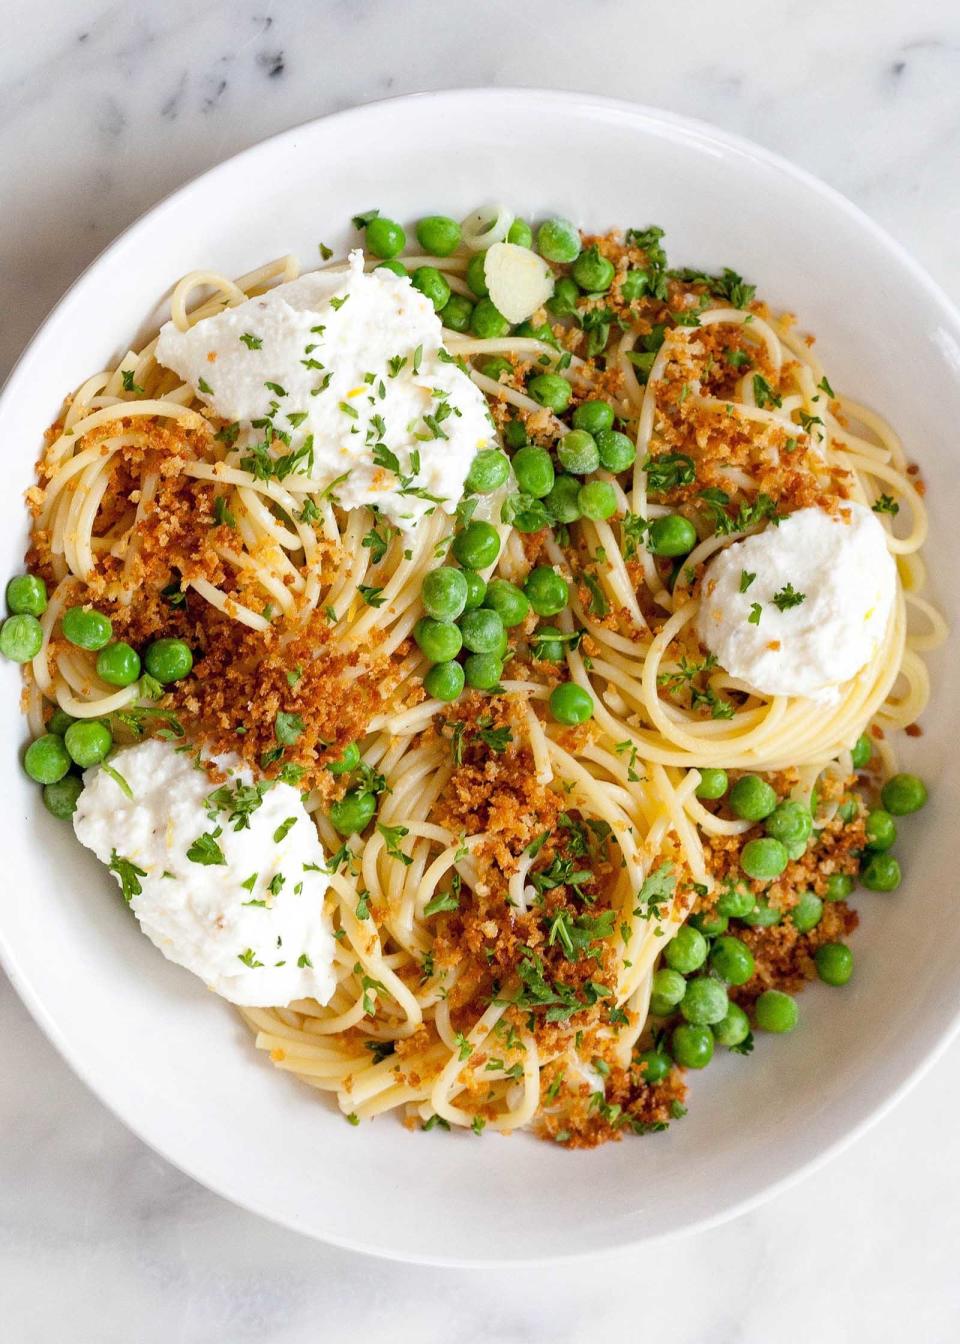 <strong>Get the <a href="http://www.simplyrecipes.com/recipes/lemony_spaghetti_with_peas_and_ricotta/" target="_blank">Lemony Spaghetti with Peas and Ricotta recipe</a>&nbsp;from Simply Recipes</strong>